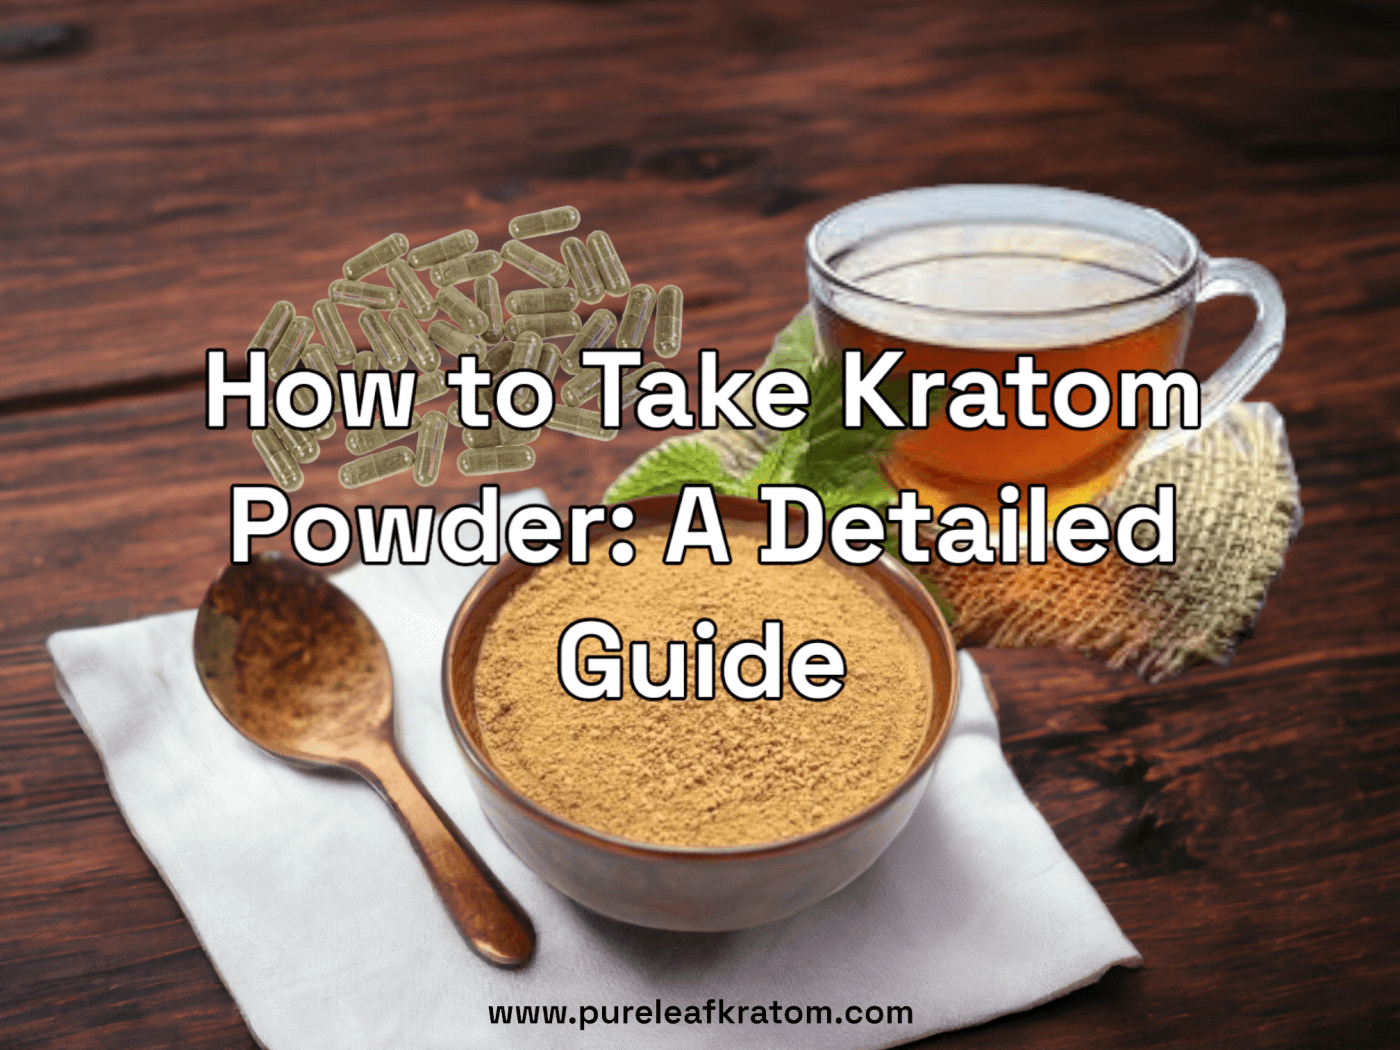 How to Take Kratom Powder: A Detailed Guide